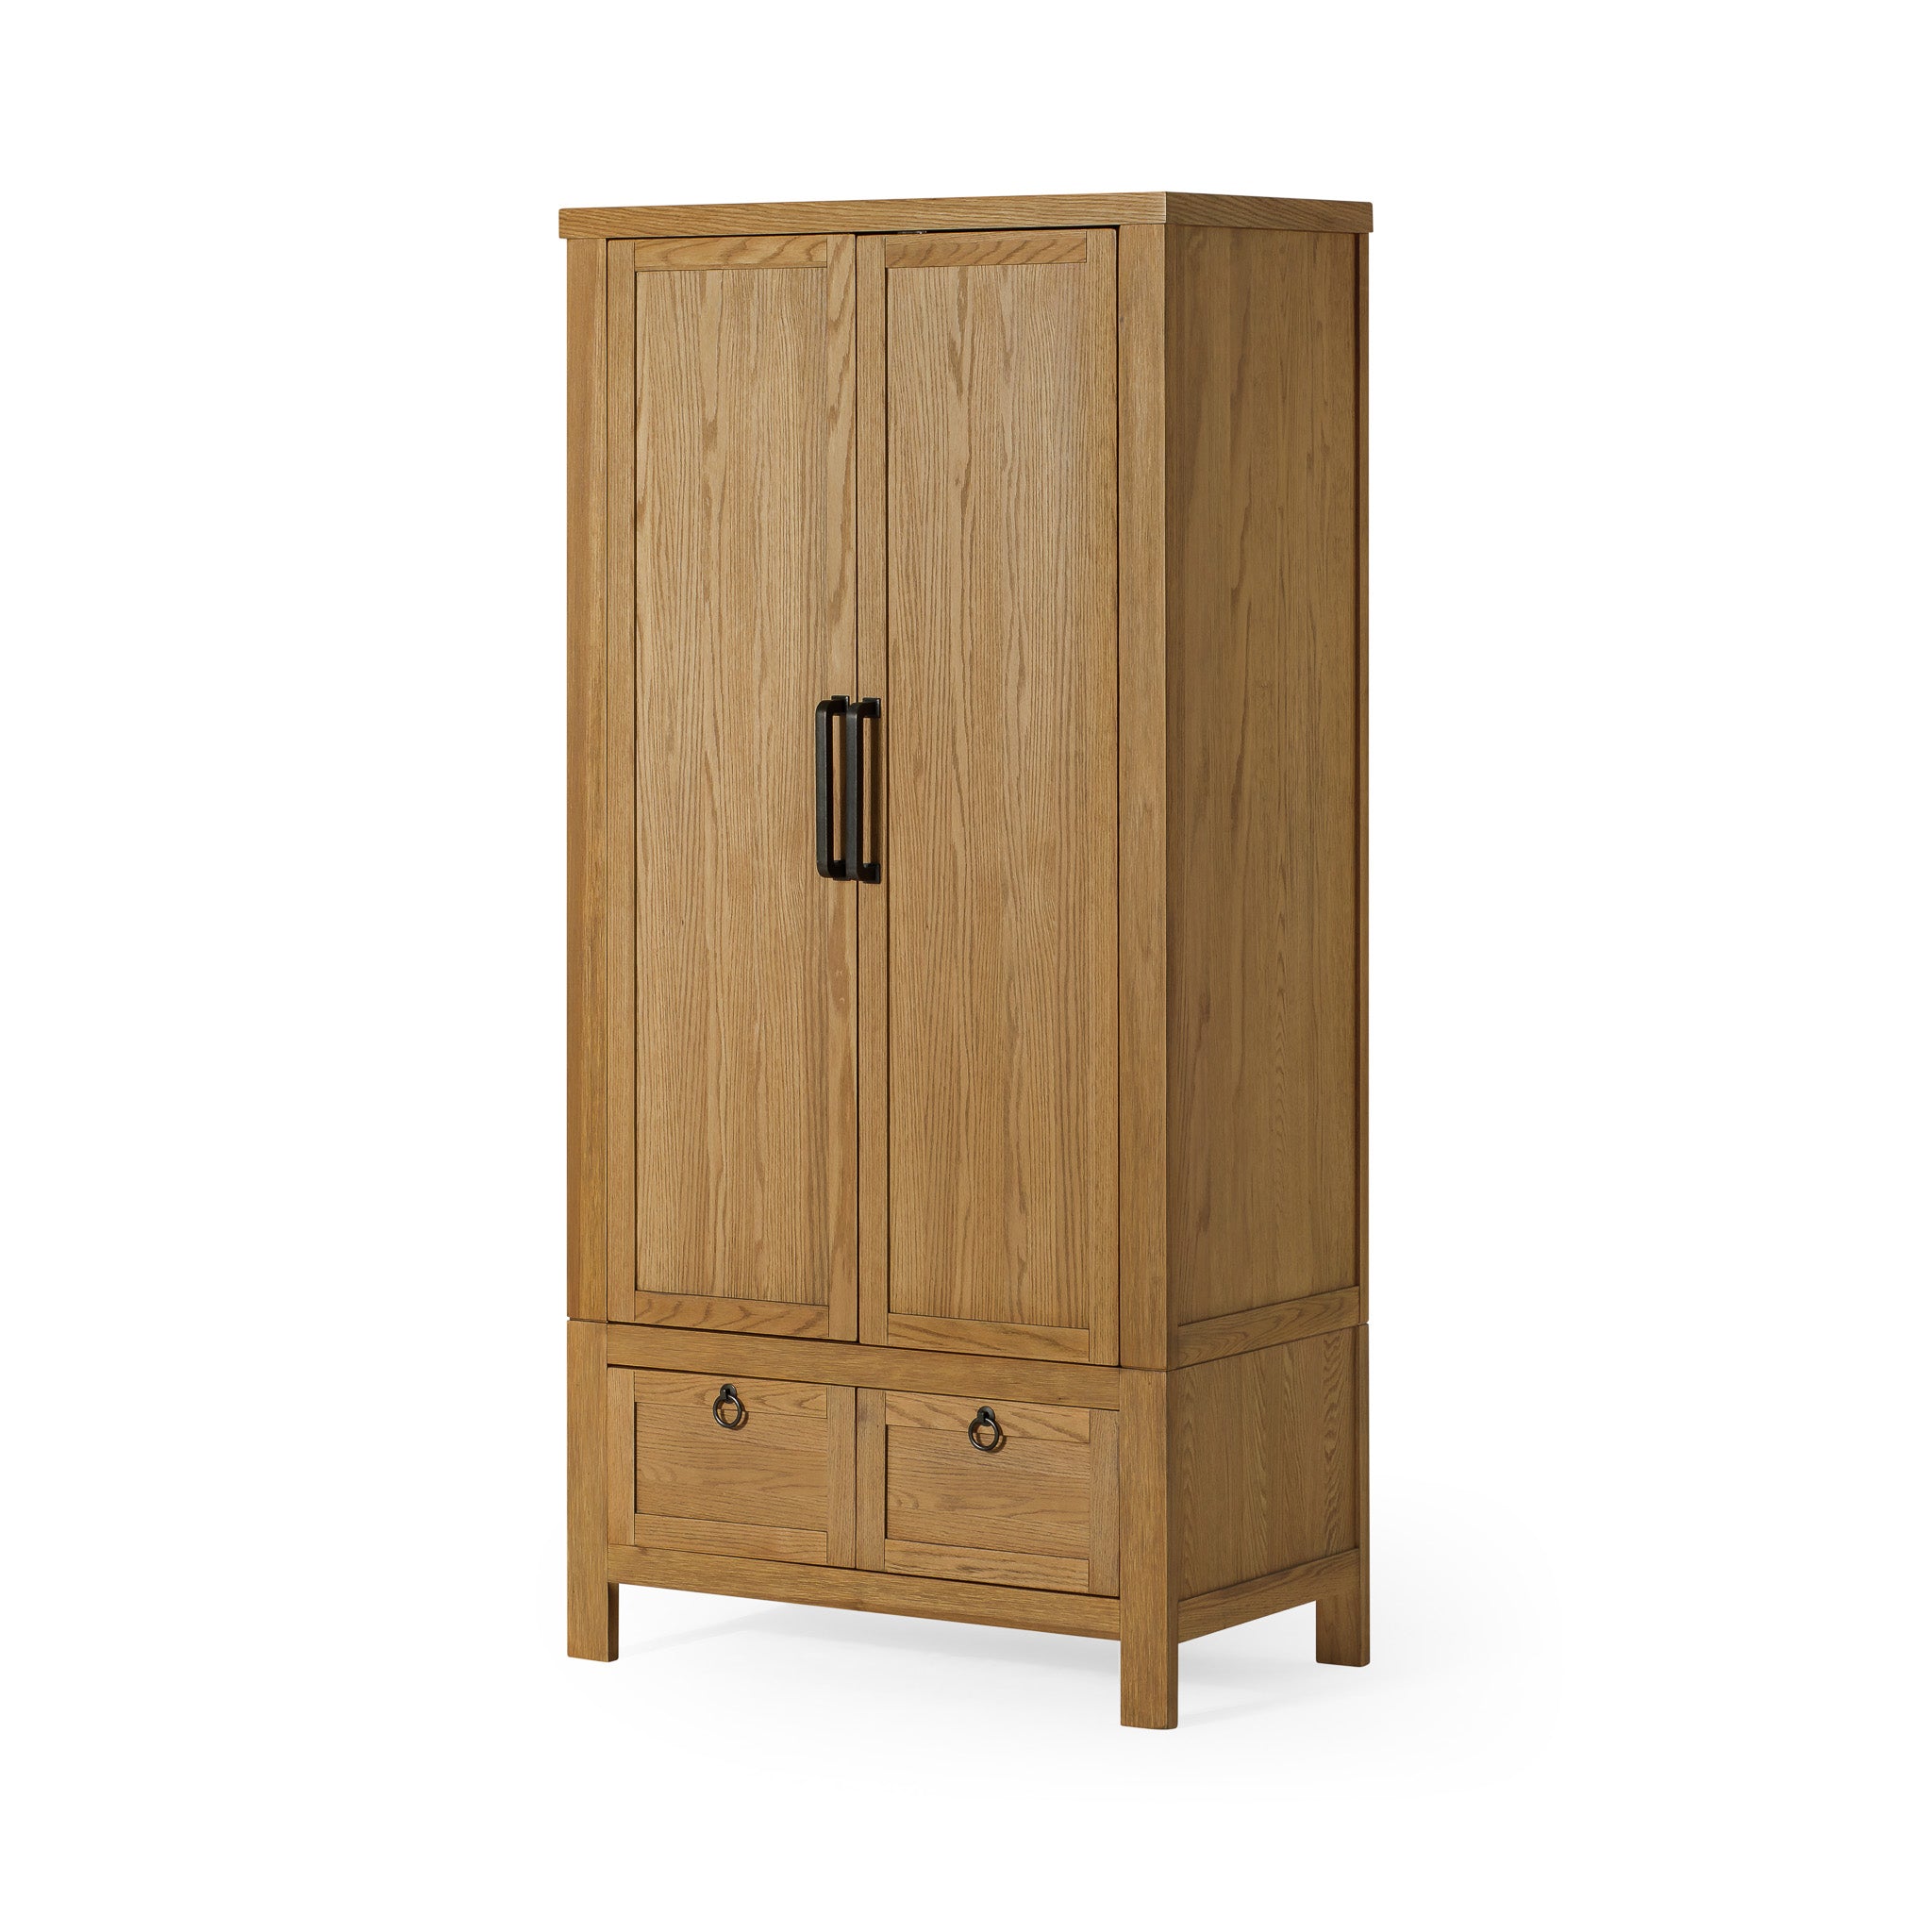 Vaughn Organic Wooden Cabinet in Weathered Natural Finish in Cabinets by Maven Lane